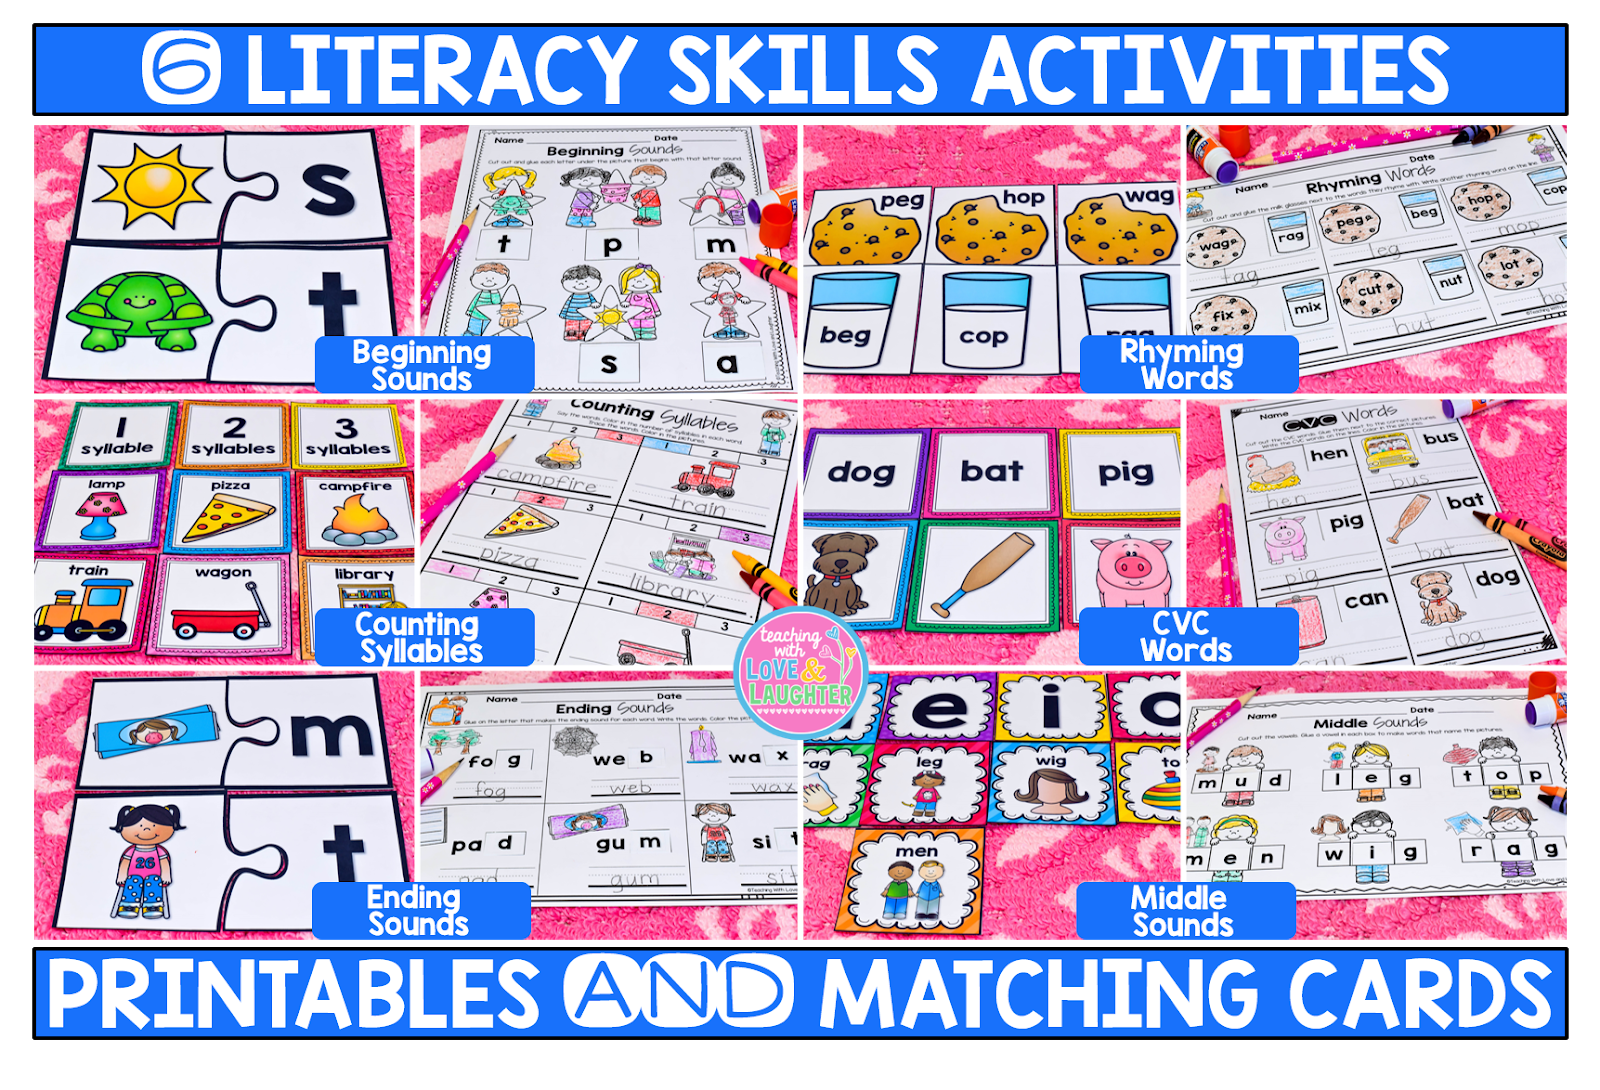 Teaching With Love and Laughter: Kindergarten Literacy Activities